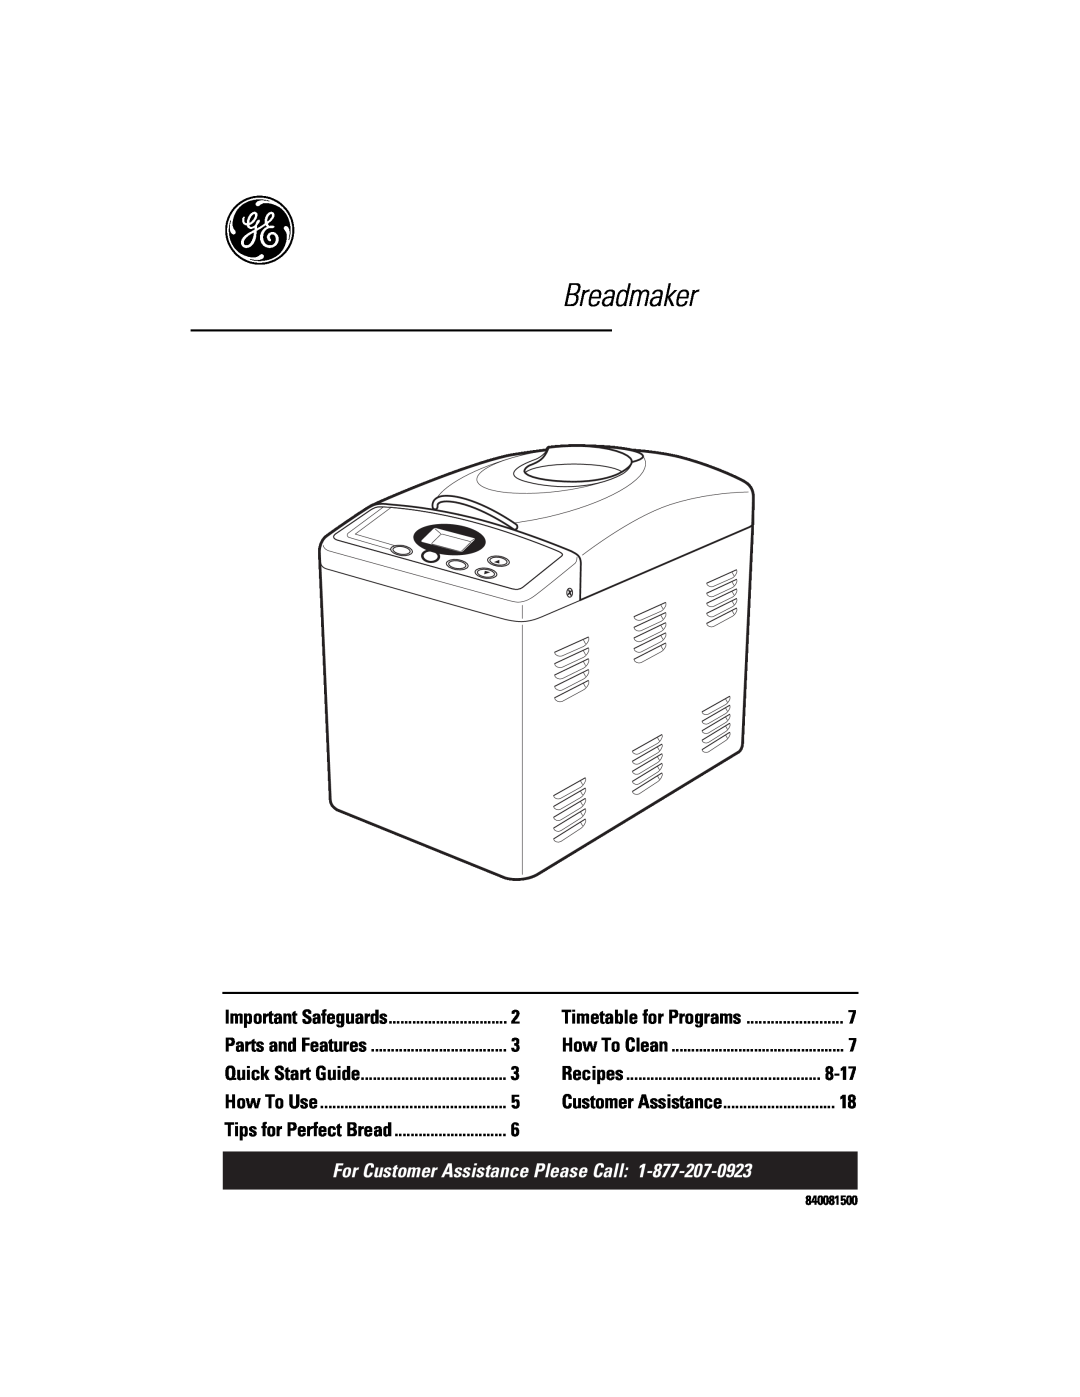 GE 840081500 quick start Breadmaker, 8-17, For Customer Assistance Please Call, Important Safeguards, Parts and Features 